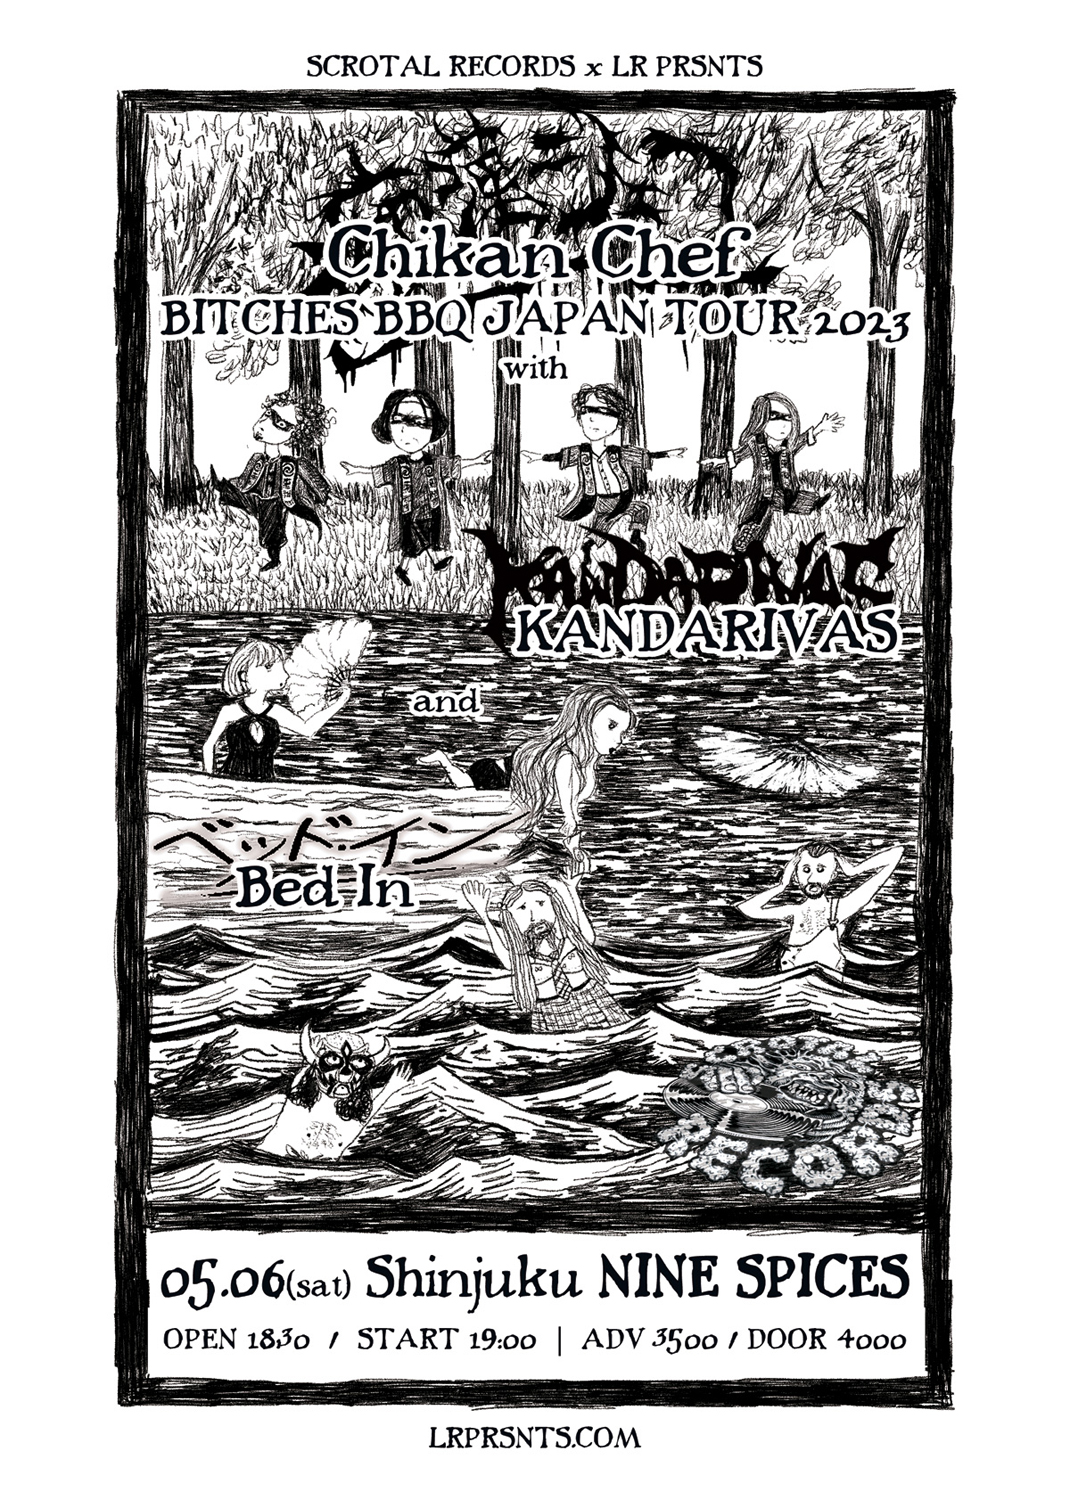 Scrotal Records + LR PRSNTS "CHIKAN CHEF Bitches BBQ Japan Tour 2023 with KANDARIVAS and ベッド・イン"